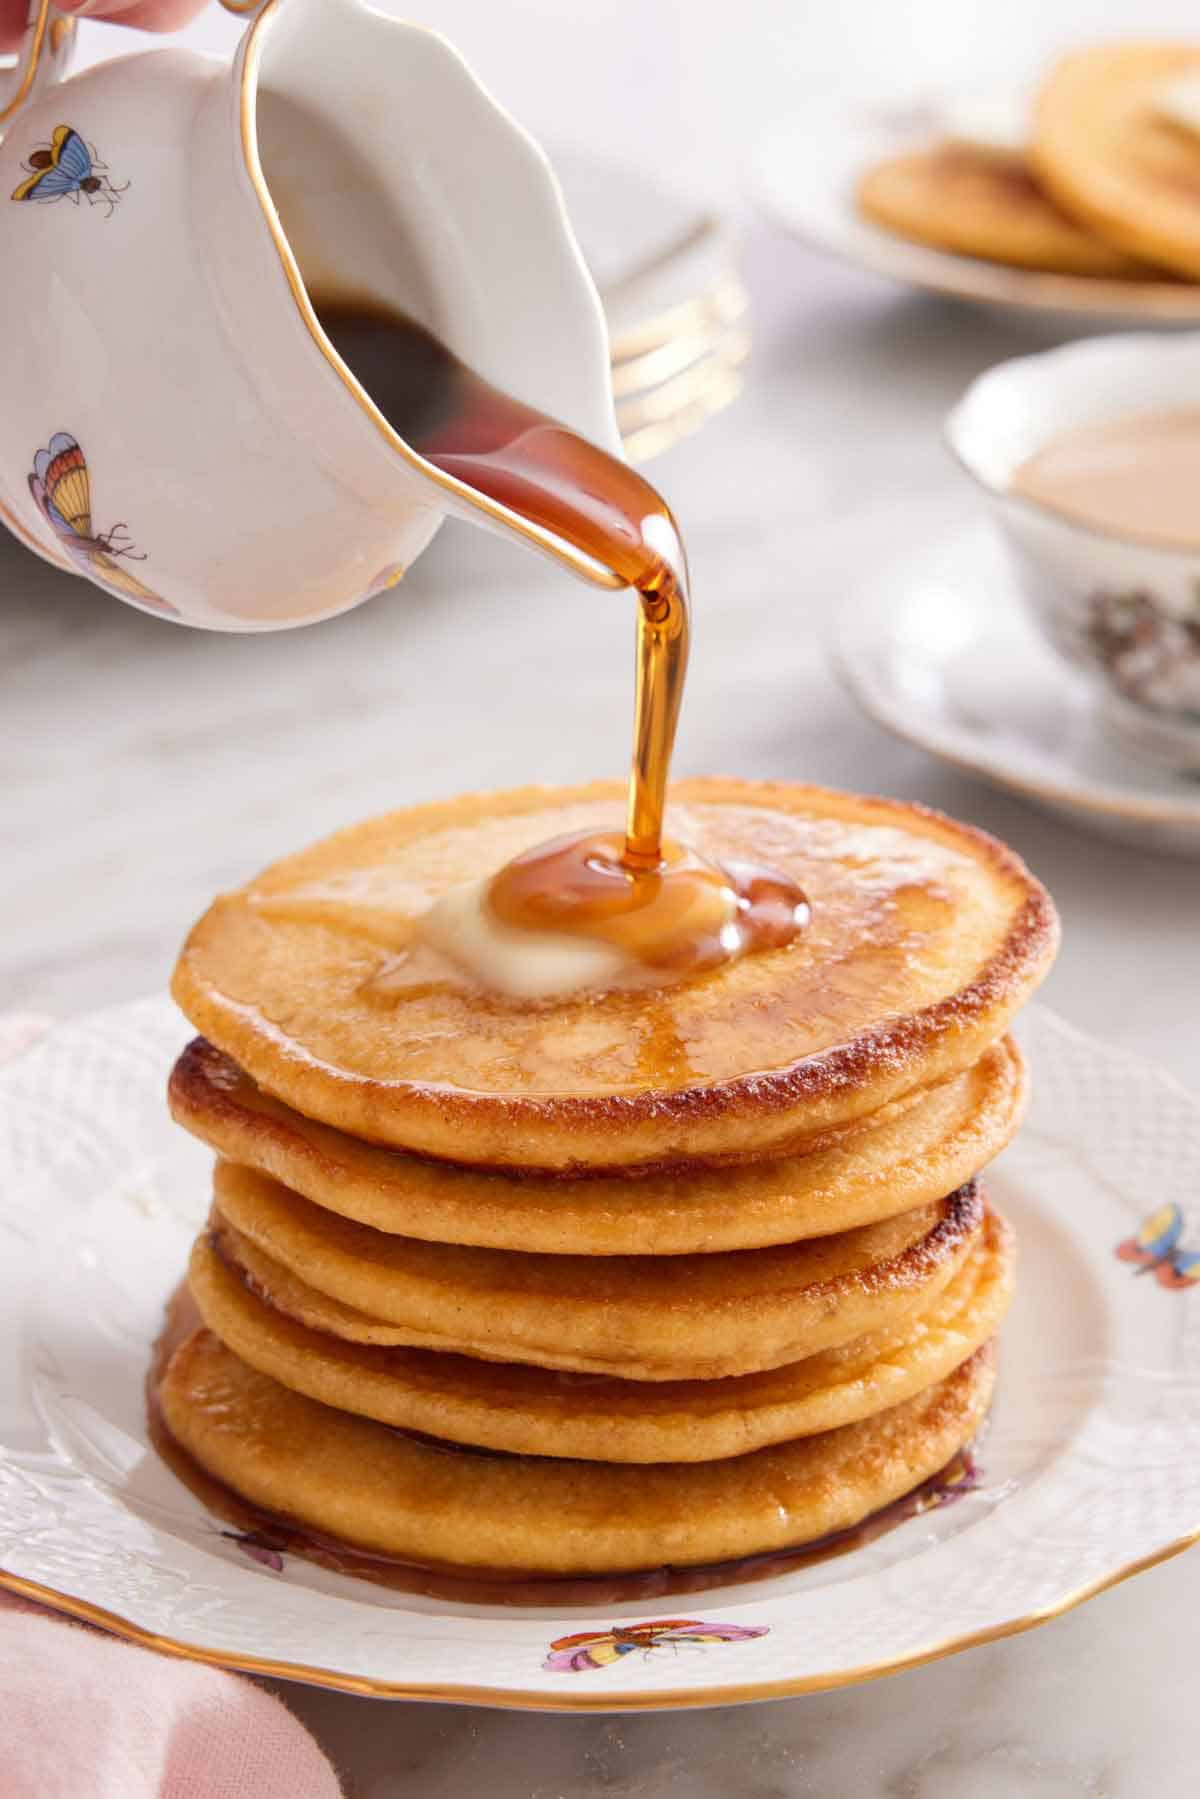 A stack of Johnny cakes with a knob of butter on top and maple syrup poured over top.